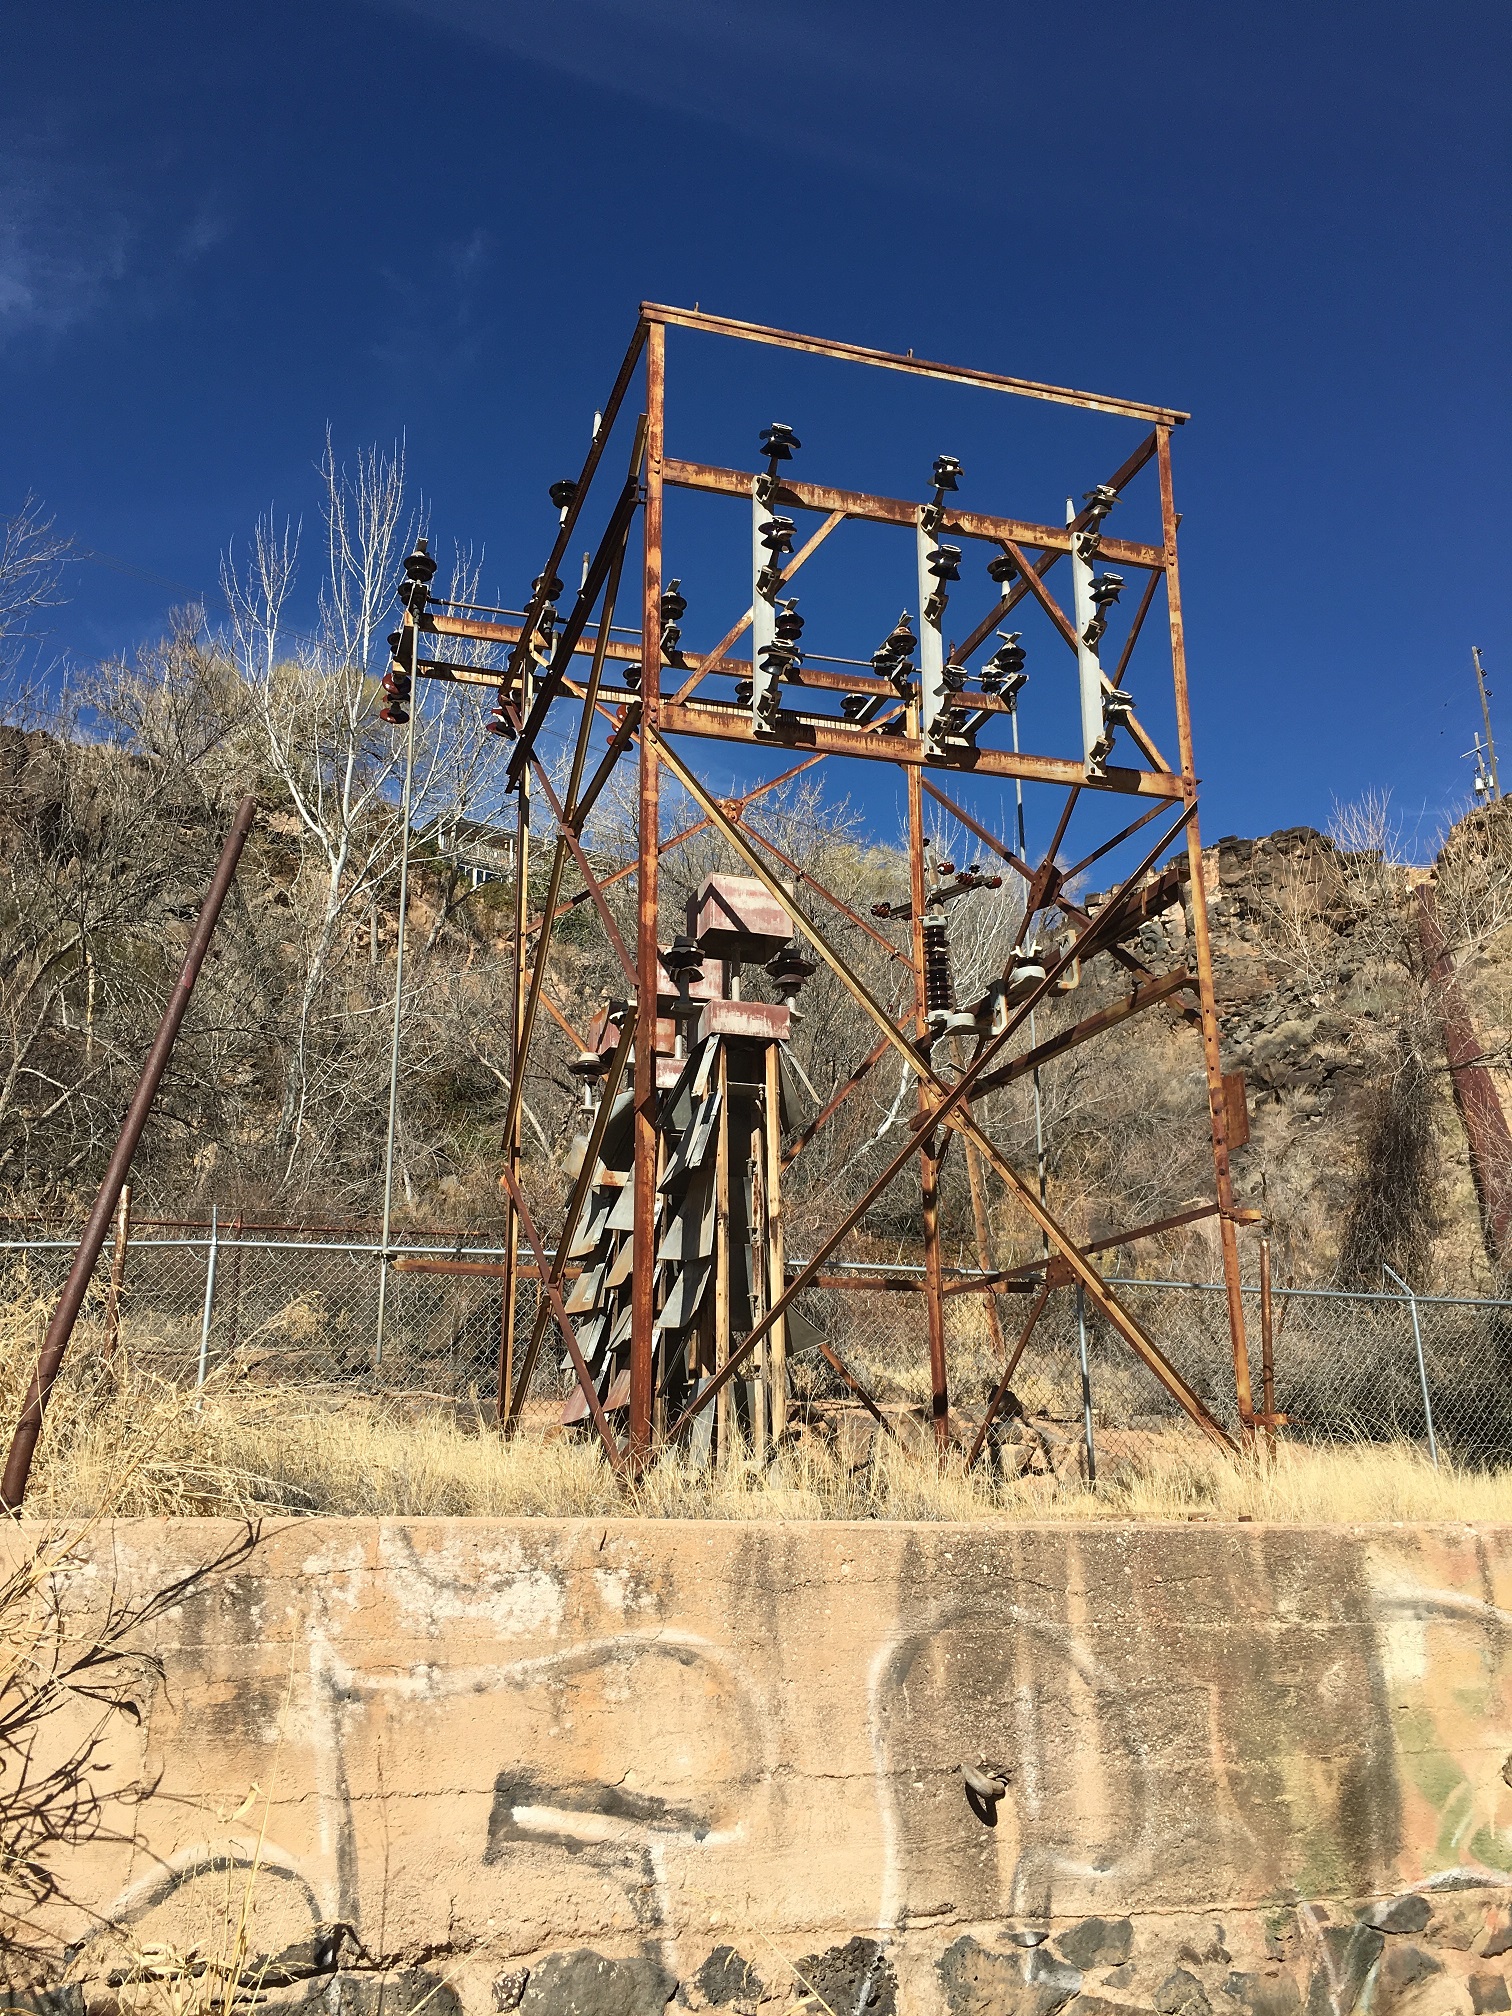 A tower for supporting power lines at the old Hurricane-LaVerkin Hydroelectric Power Plant